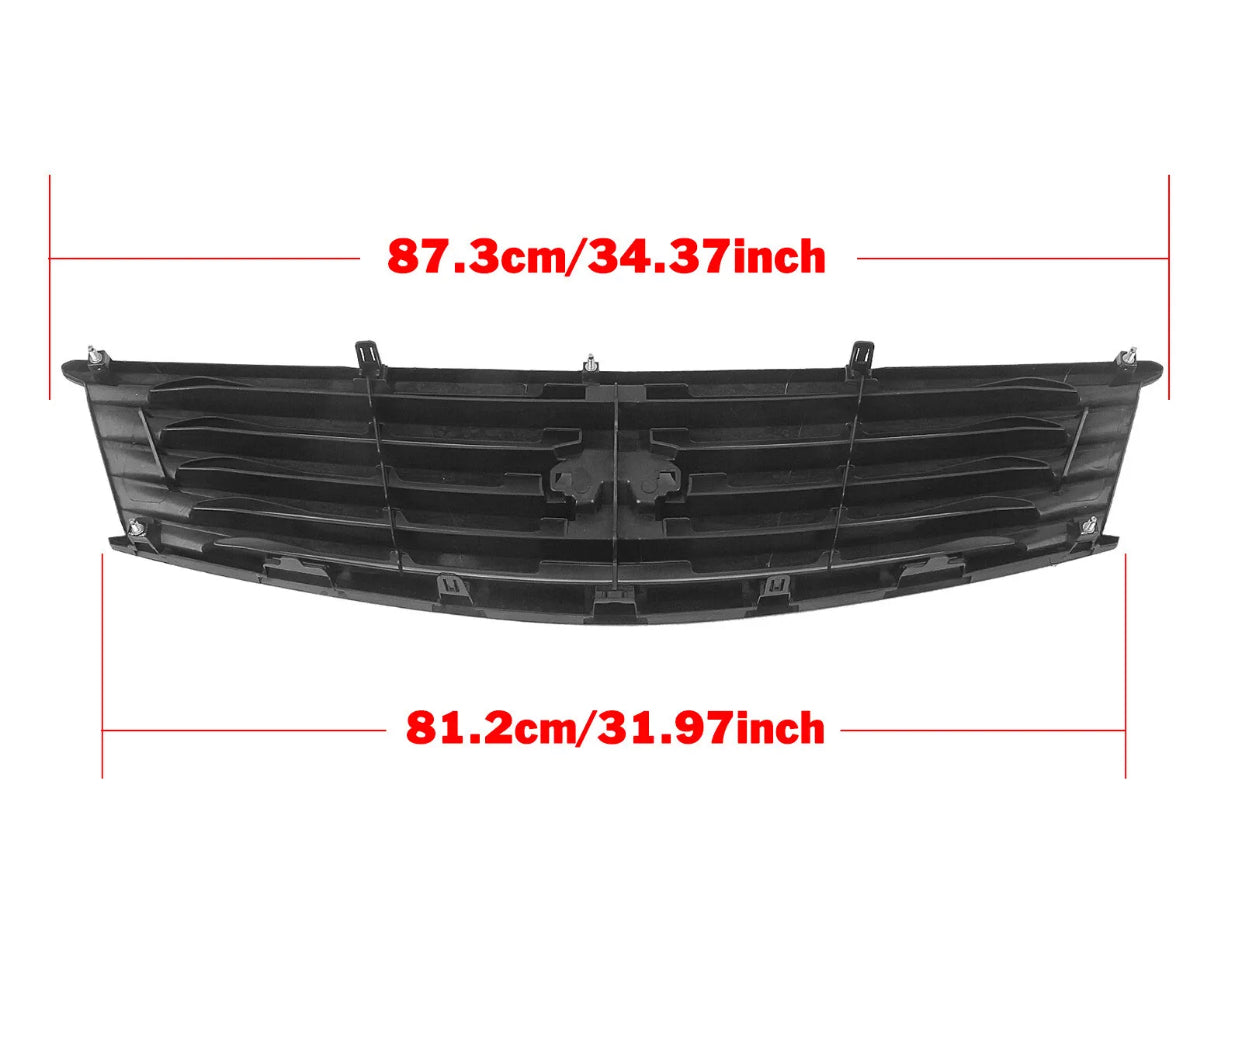 Front Grill Grille For Infiniti G37 2 Door Coupe 2008-2013 2011 2012 Gloss Black